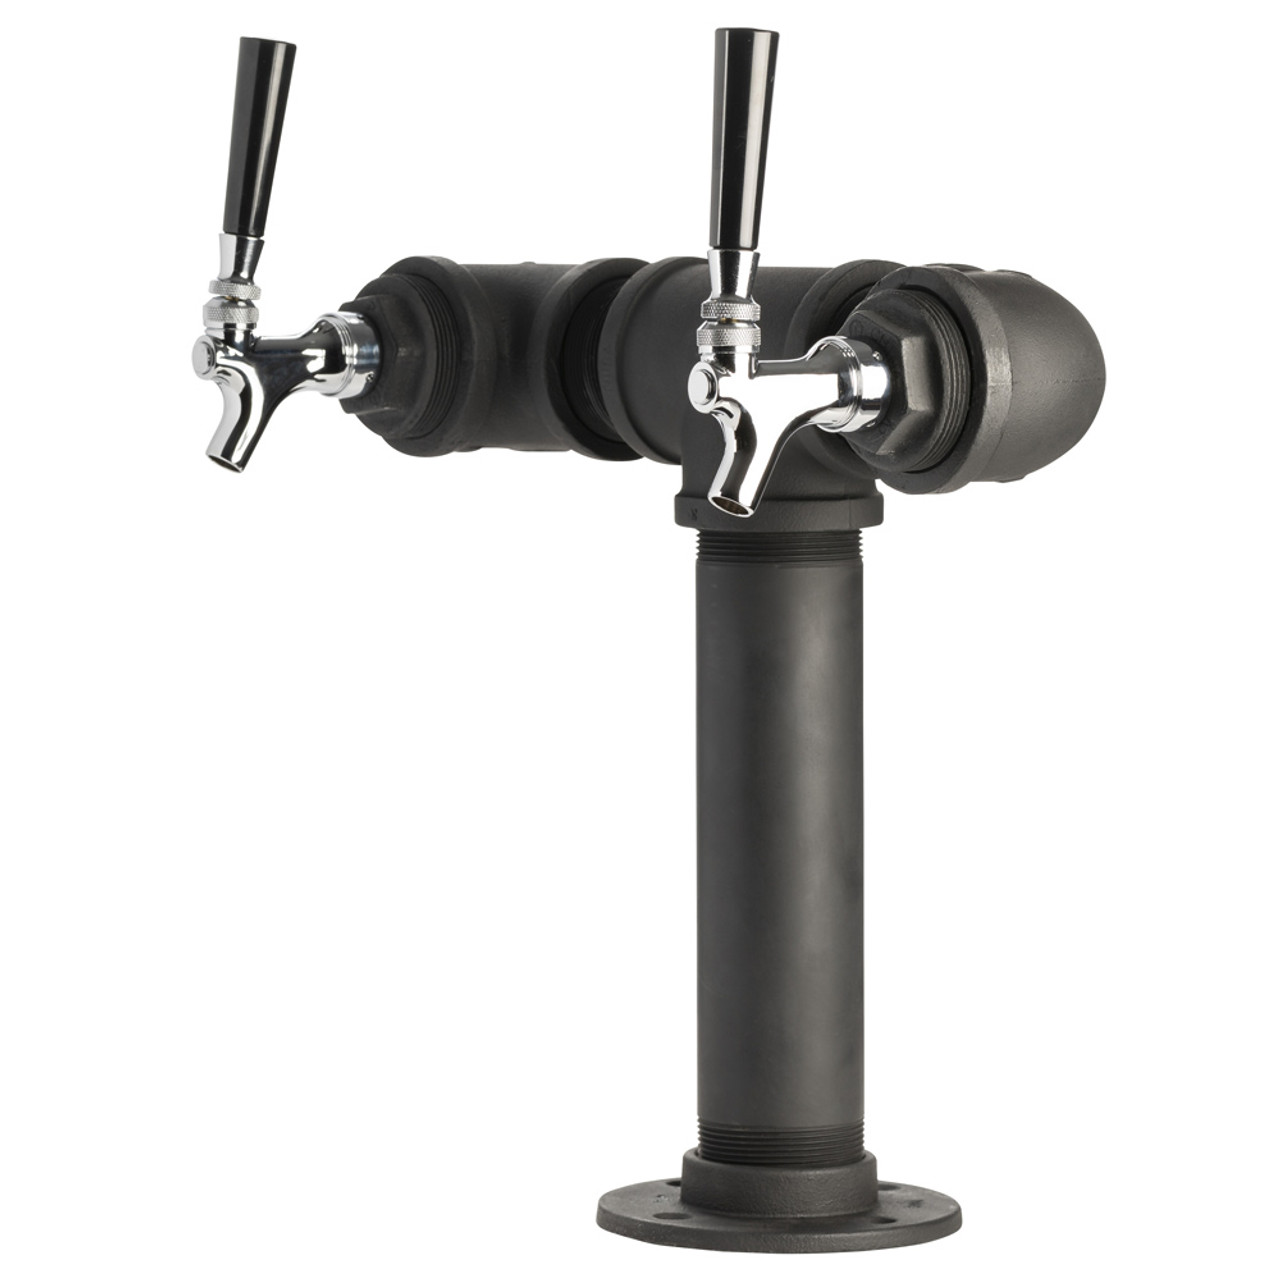 https://cdn11.bigcommerce.com/s-cznxq08r7/images/stencil/1280x1280/products/565/2506/2stblkiron_16059_draft-beer-tower-black-iron-double-tap-standard-faucet_01__02576.1590767988.jpg?c=1